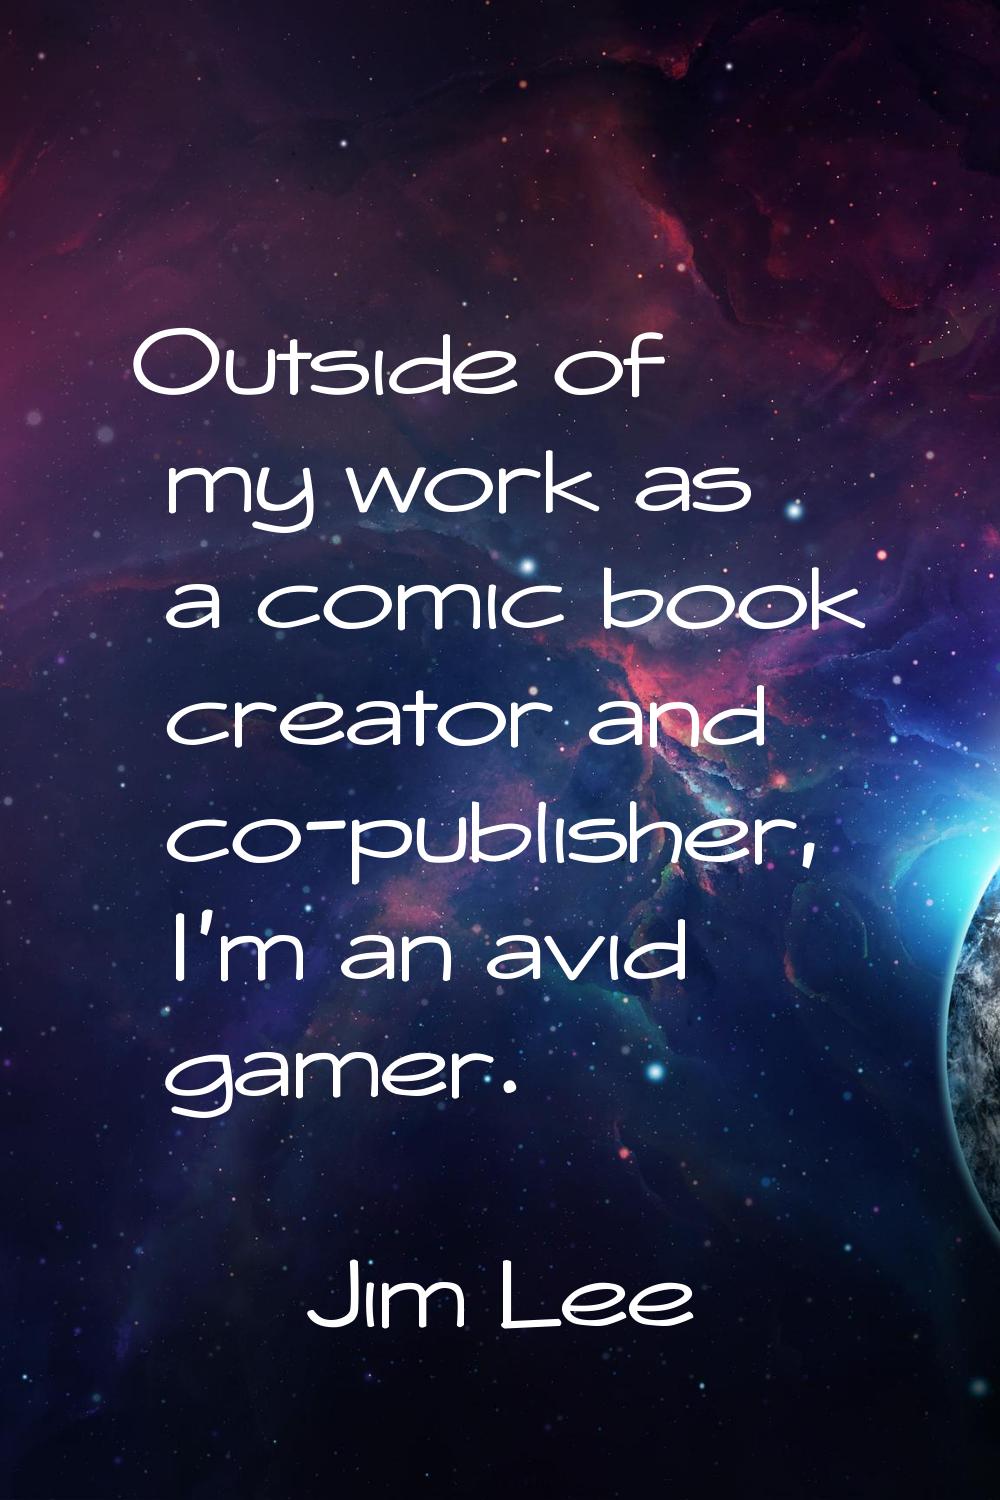 Outside of my work as a comic book creator and co-publisher, I'm an avid gamer.